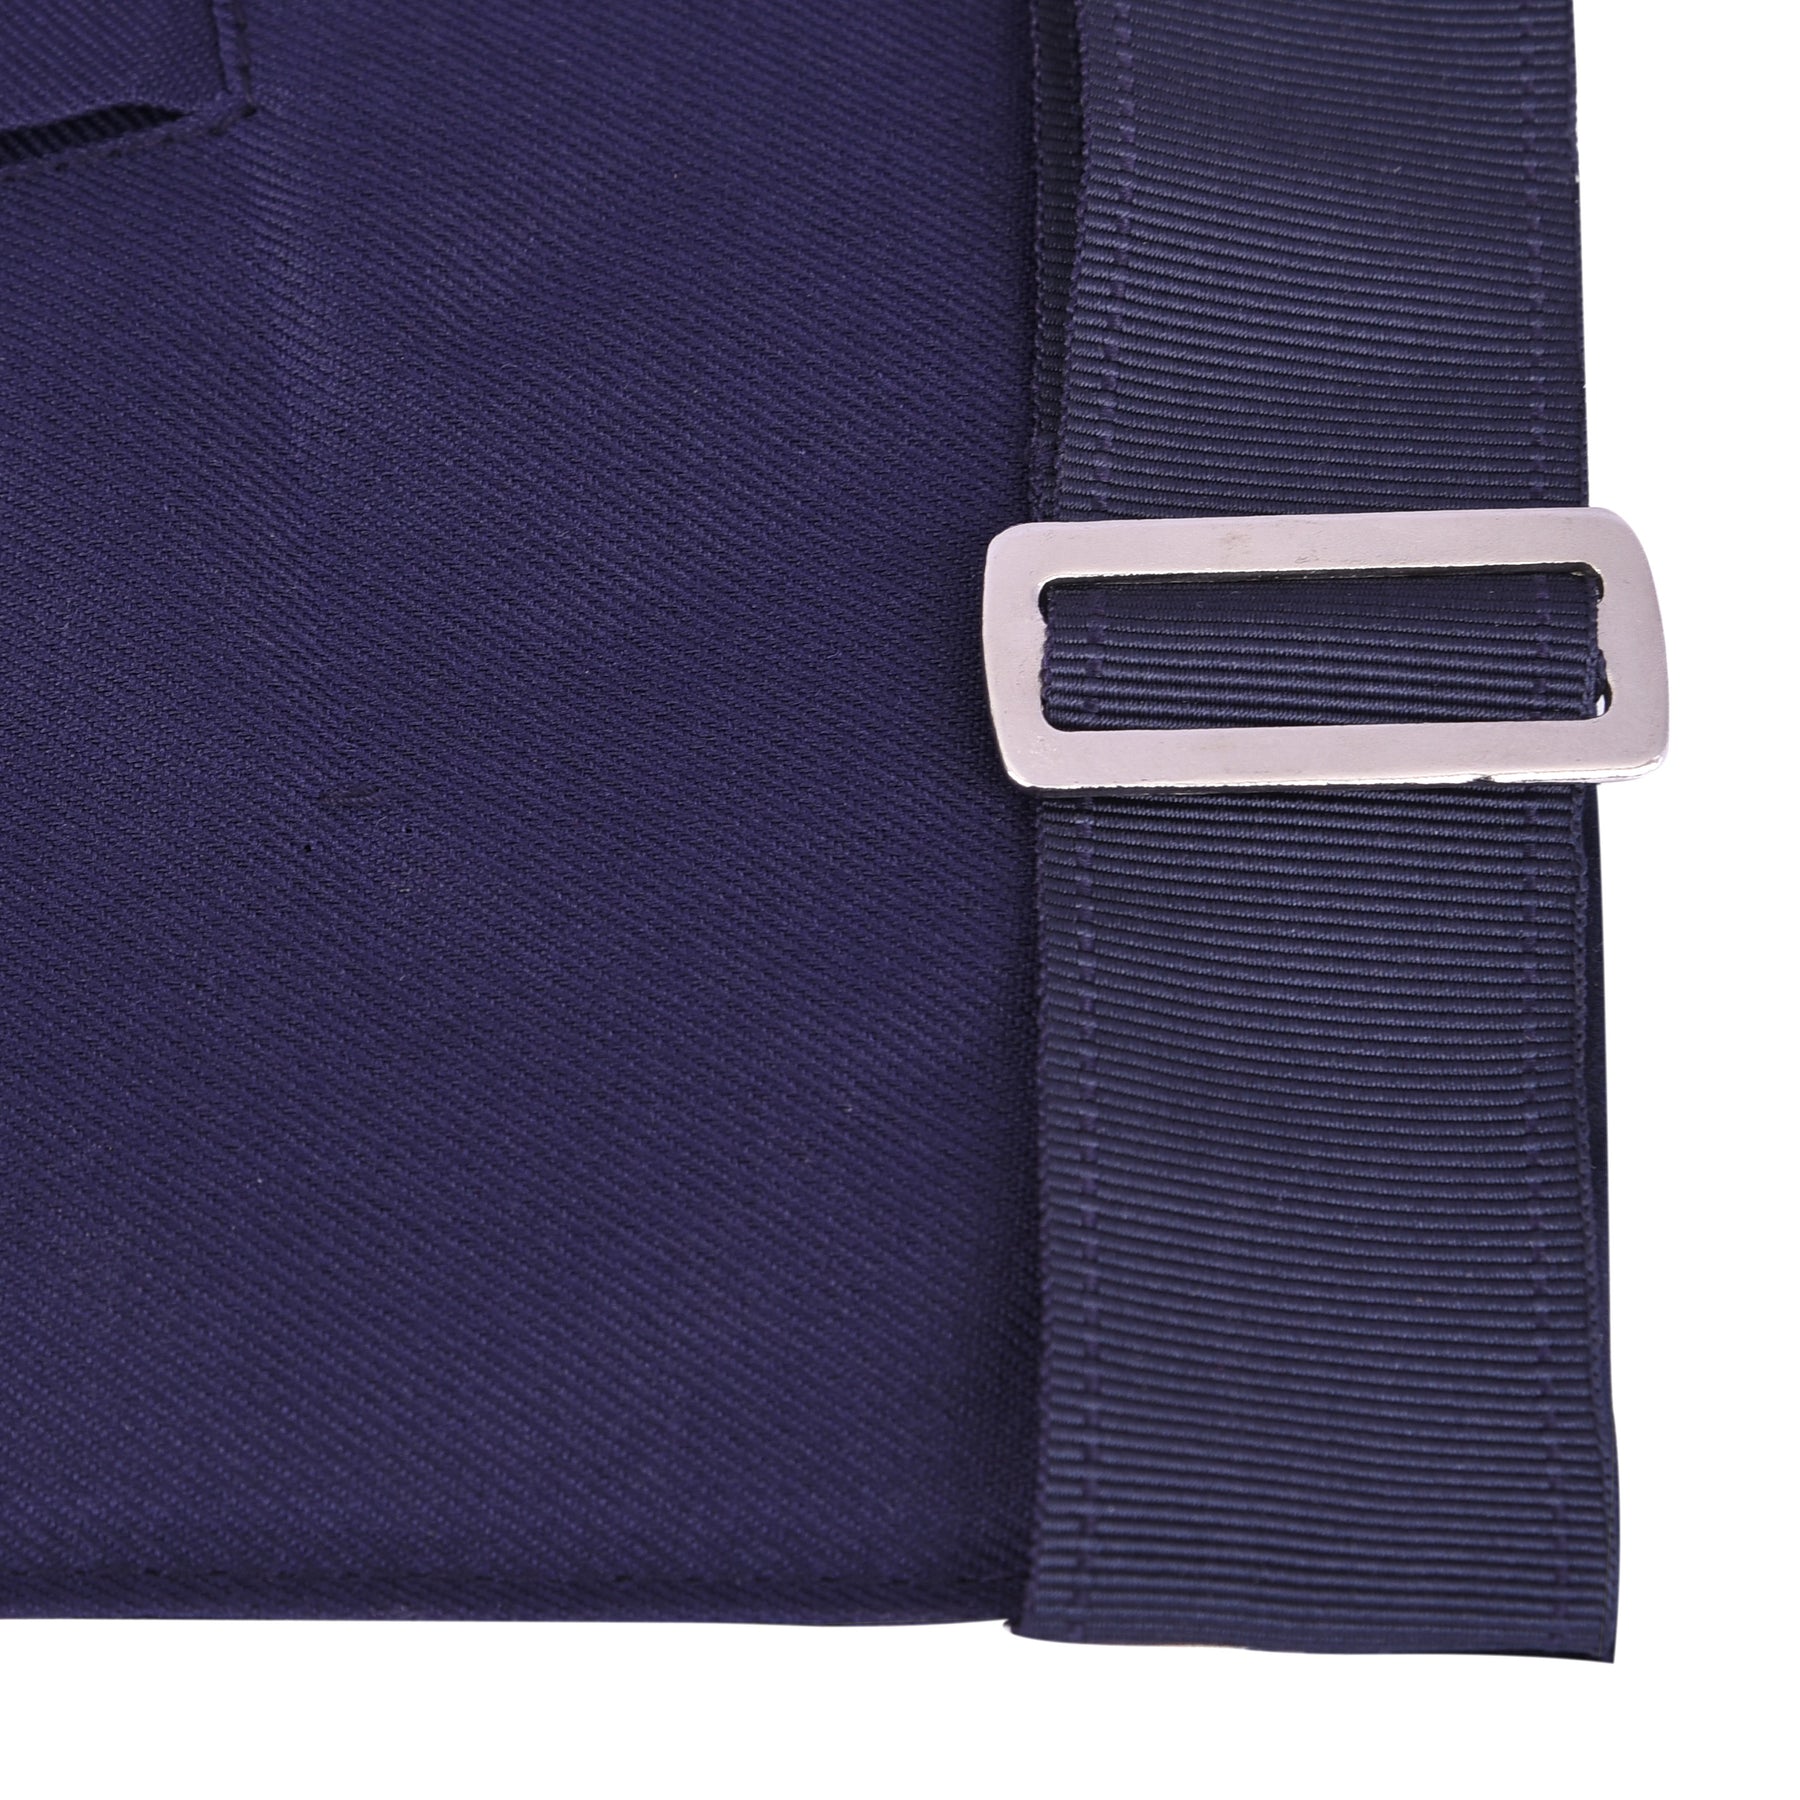 Chaplain Blue Lodge Officer Apron - Navy Velvet With Silver Embroidery Thread